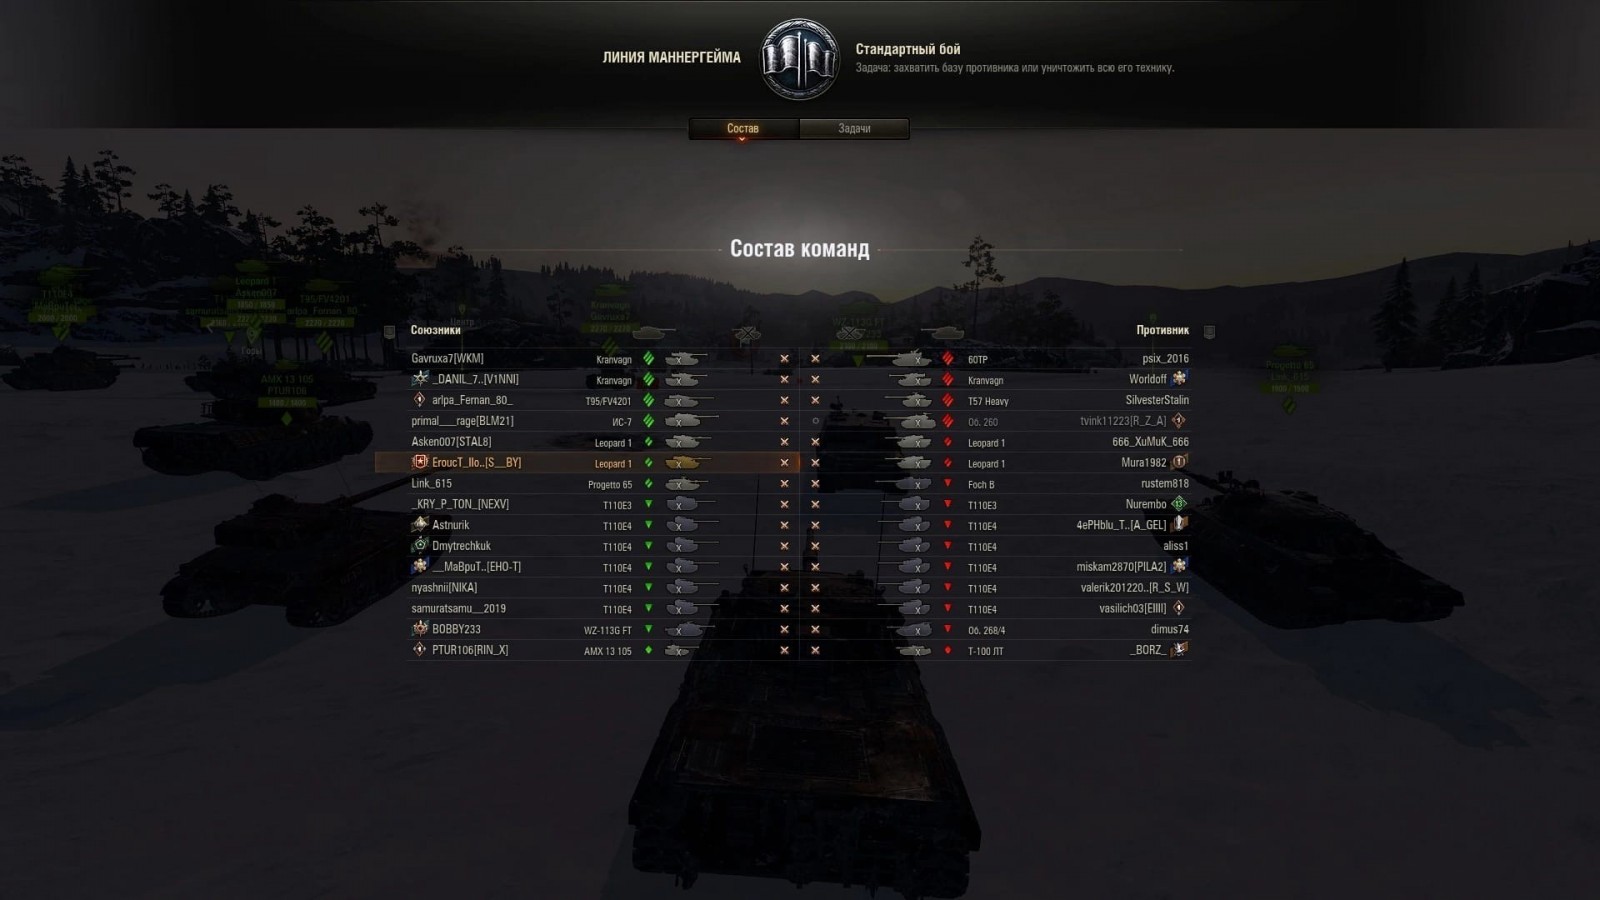 Bots? is wot using World of